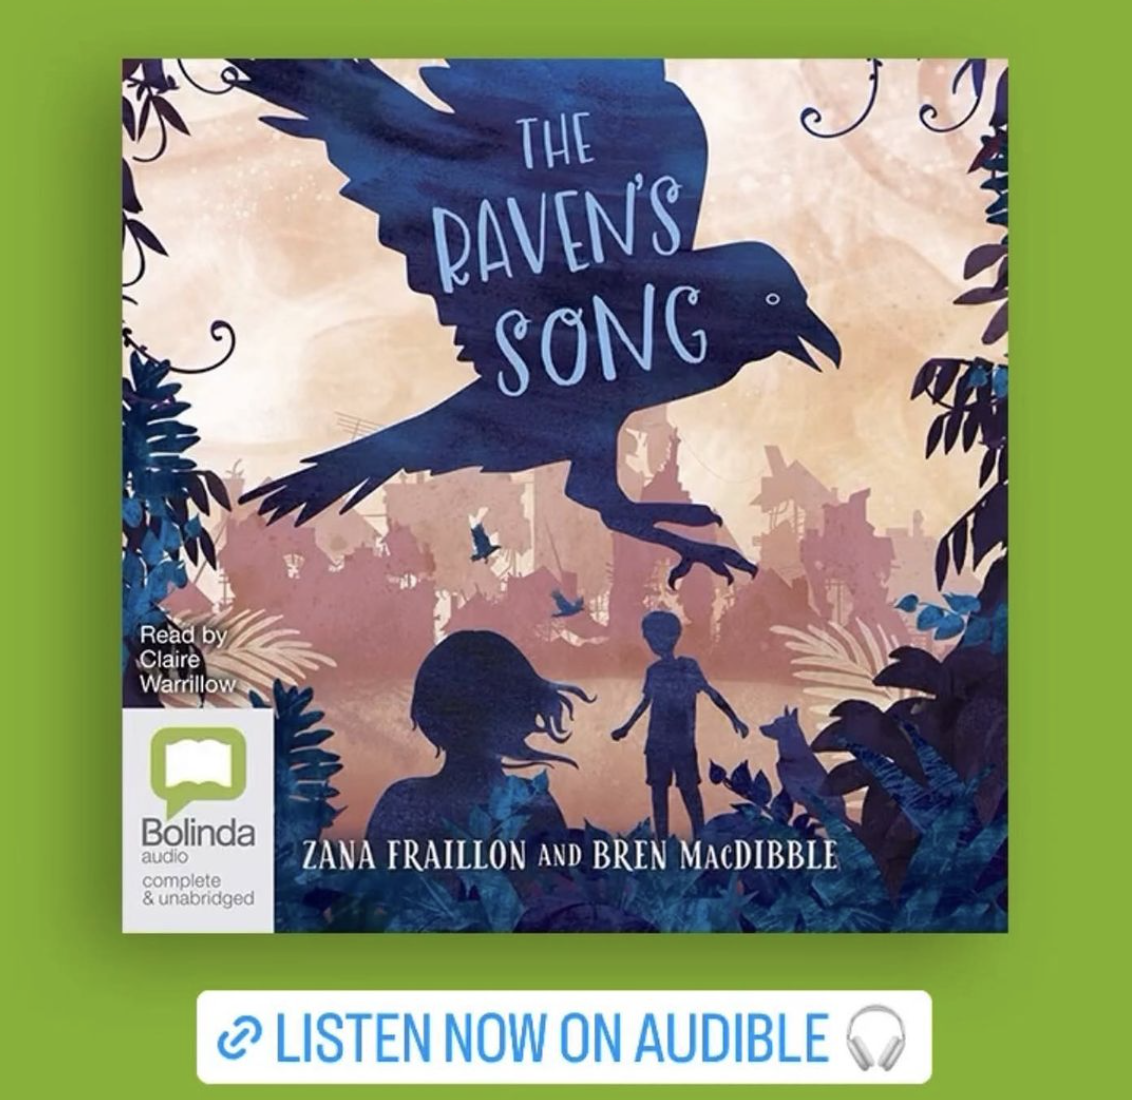 The Ravens Song on Audible